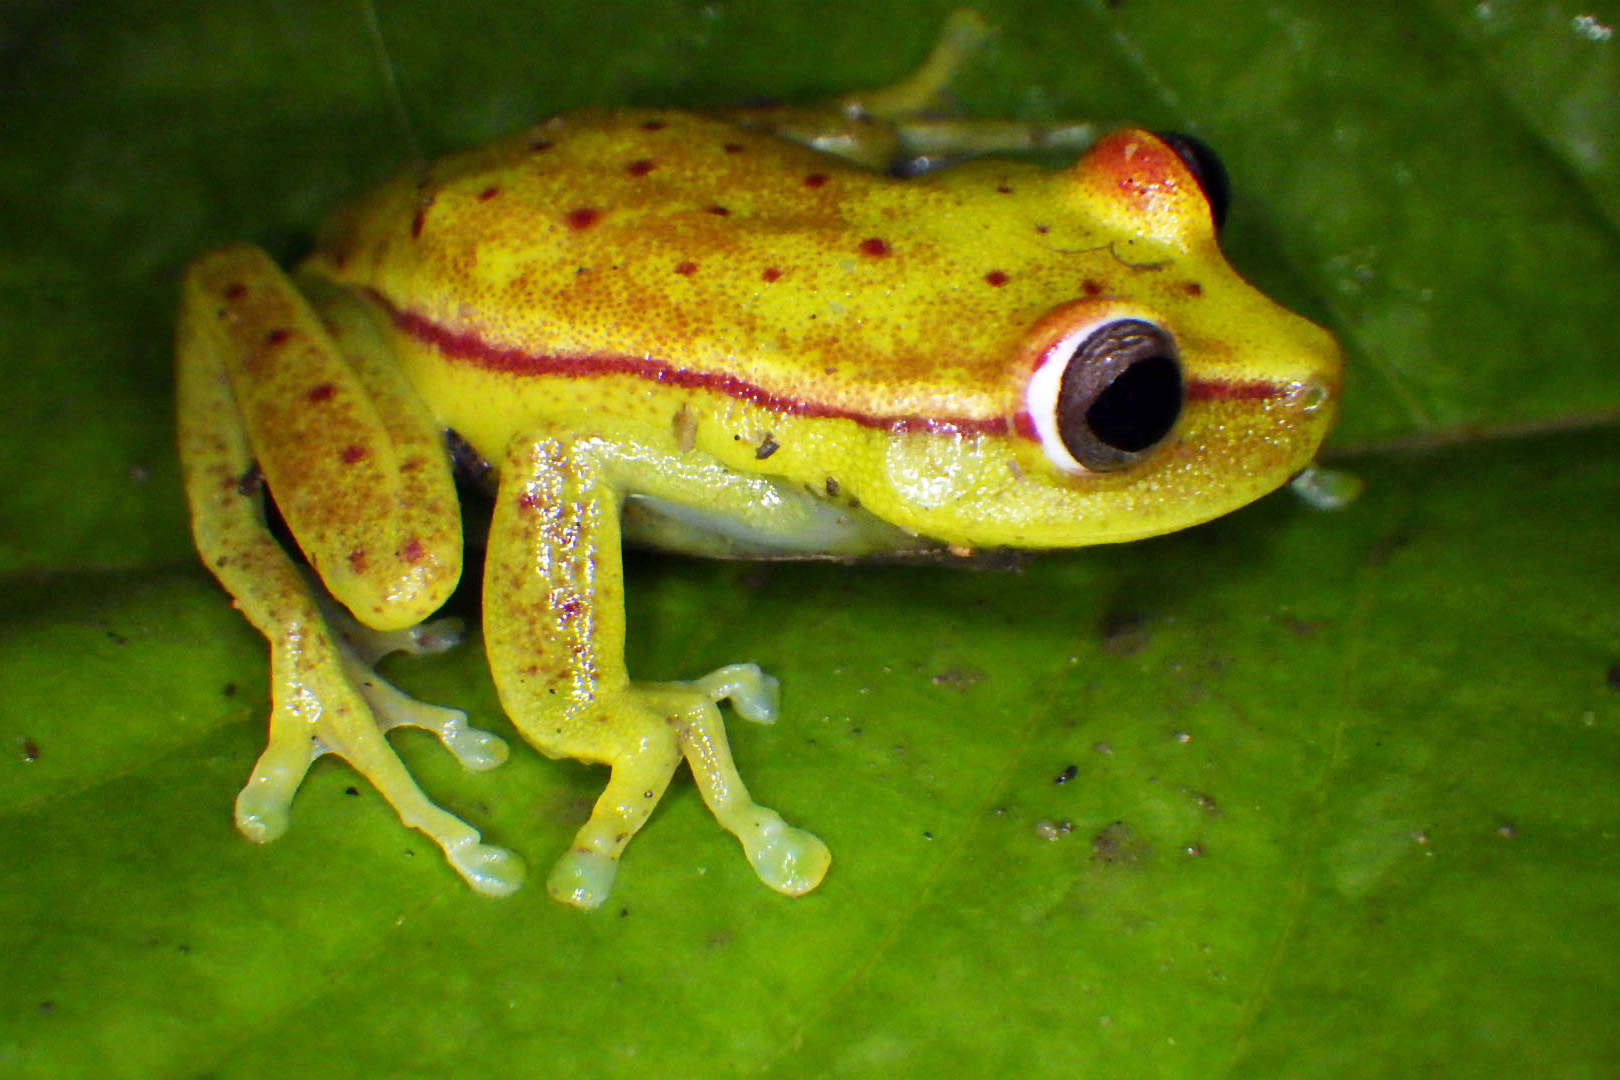 A bright green frog with red stripes down the sides and red polka dots all over, sitting atop a darker green leaf.